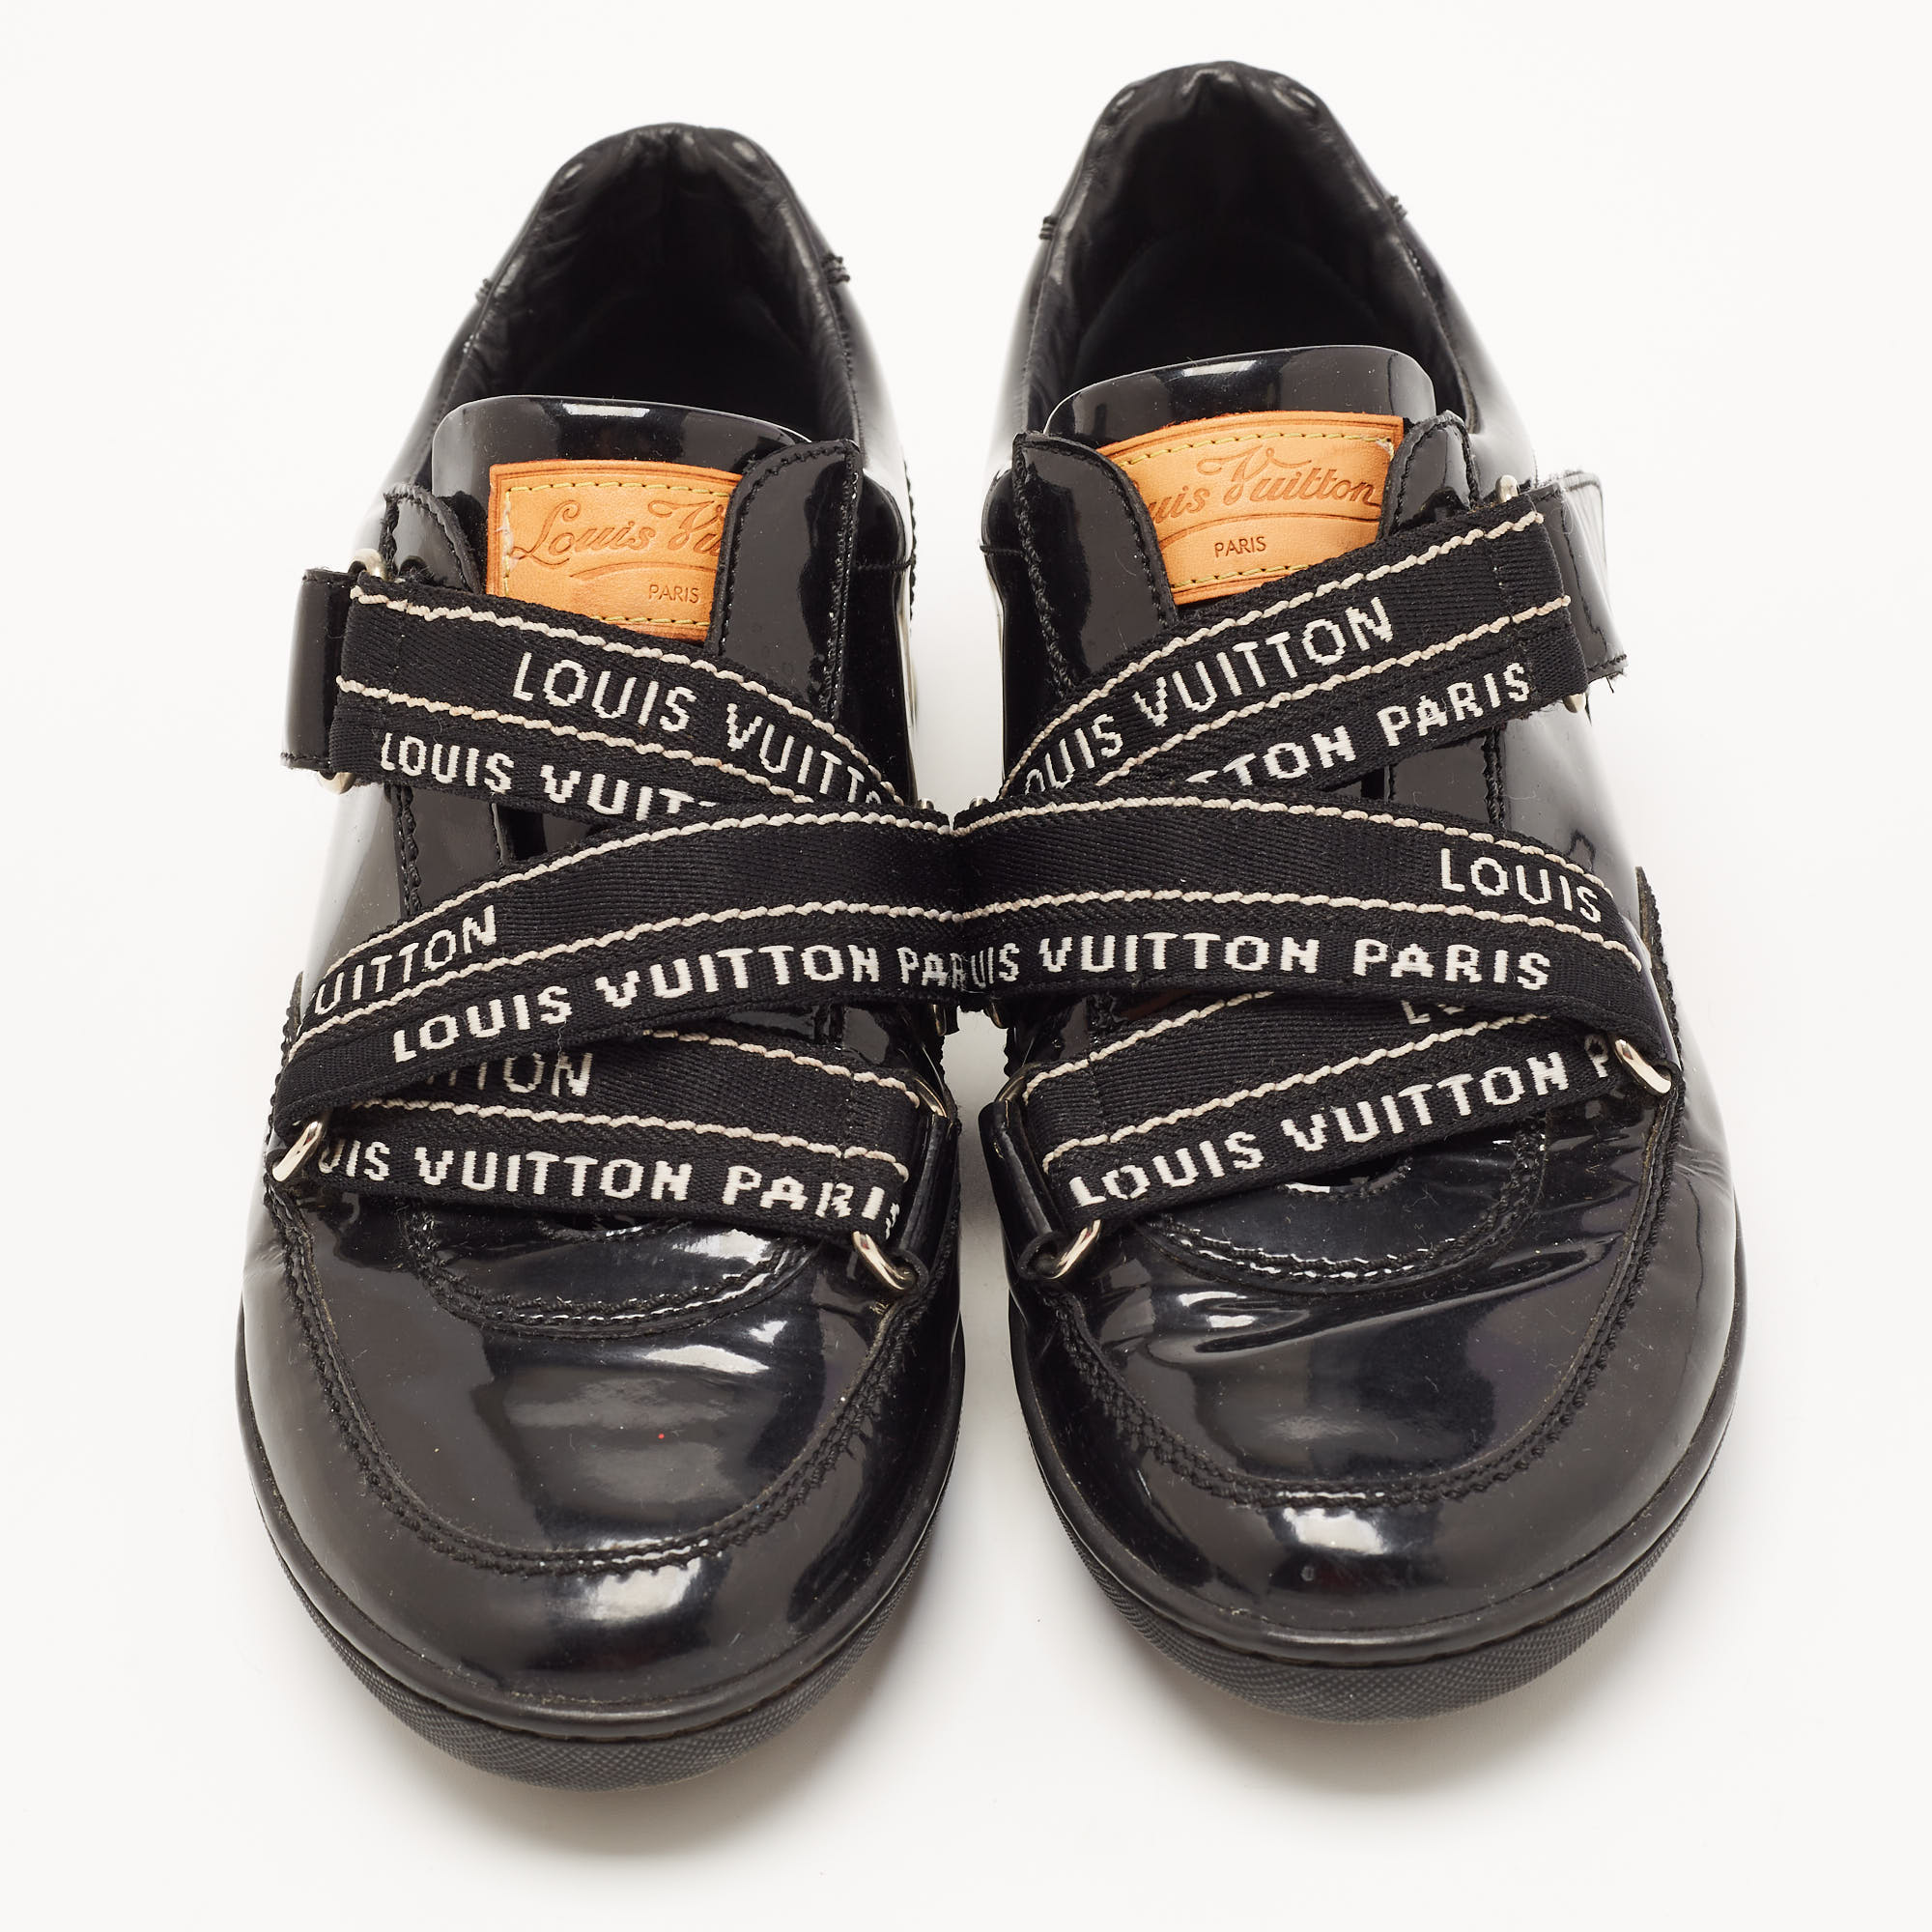 Louis Vuitton Black Patent Leather Sneakers Size 36